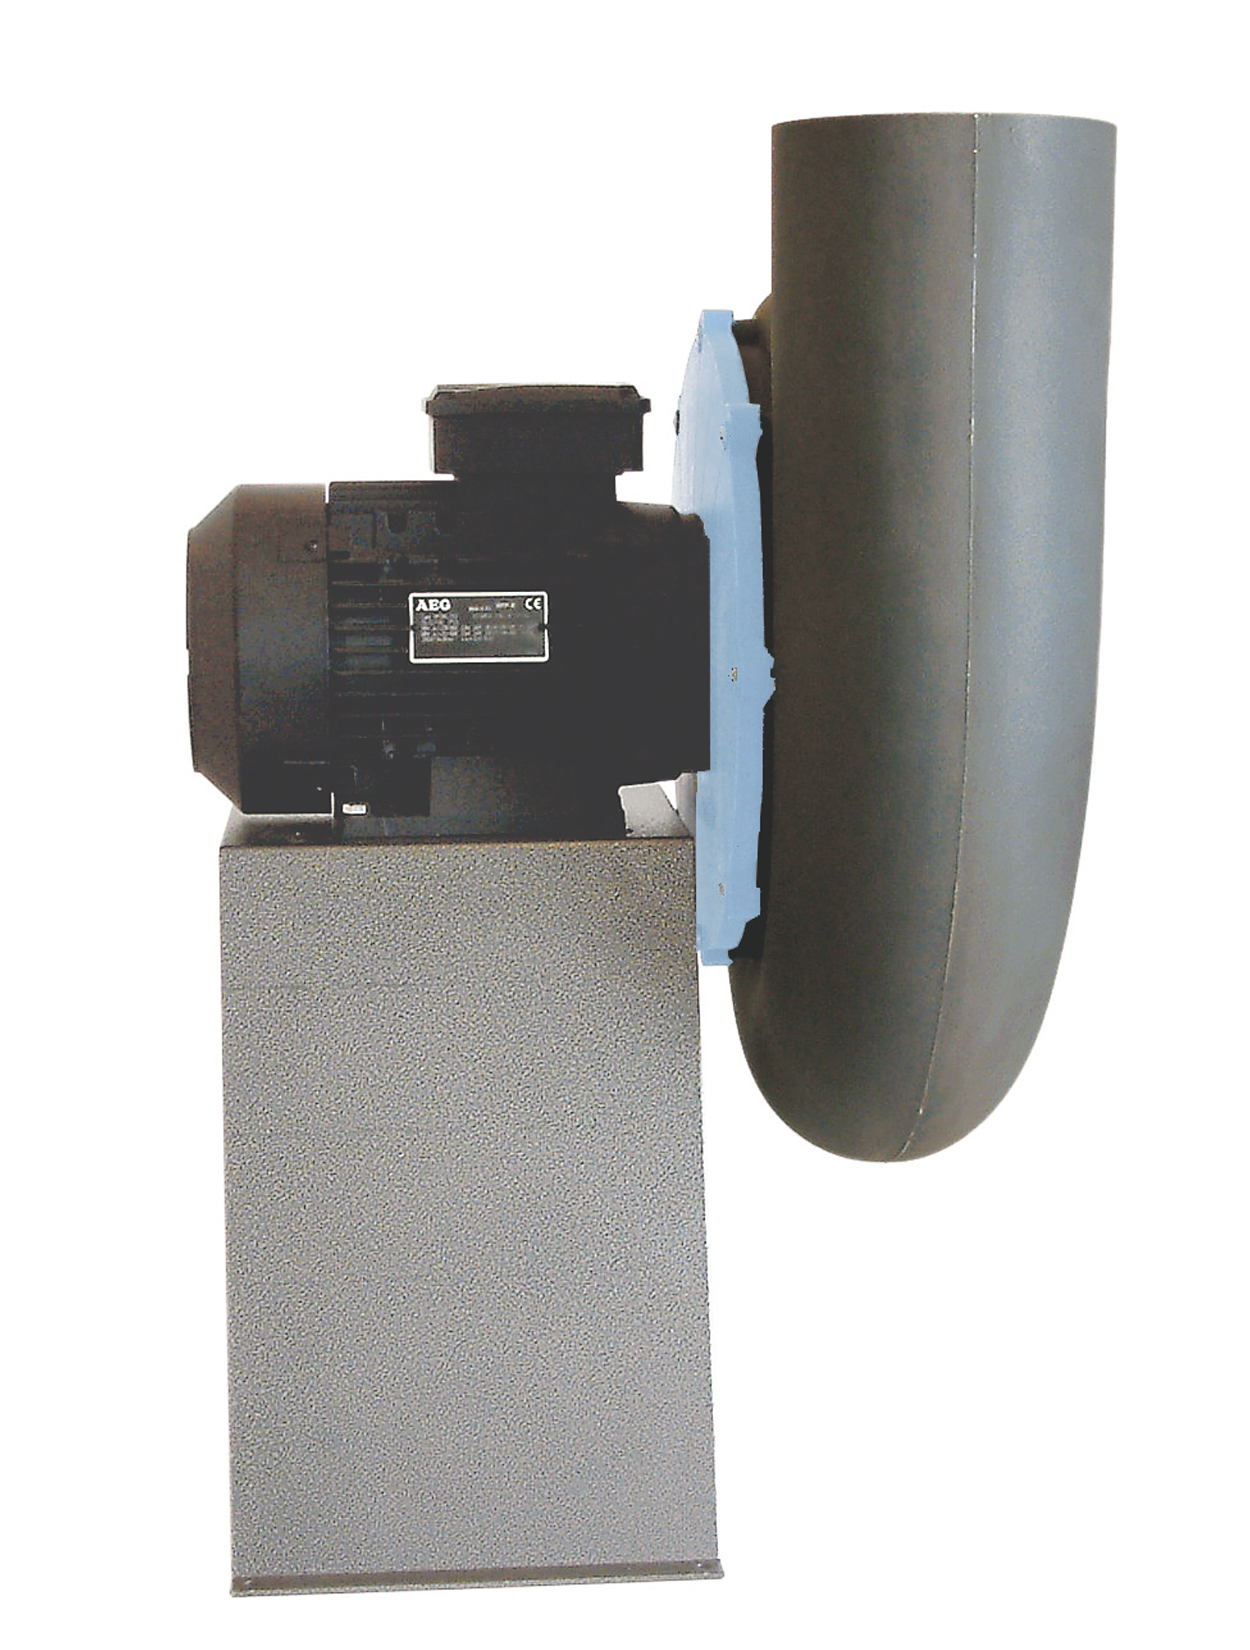 Storm 16 Forward Curve Polypropylene Blower with high Chemical Resistance mounted on stainless steel support